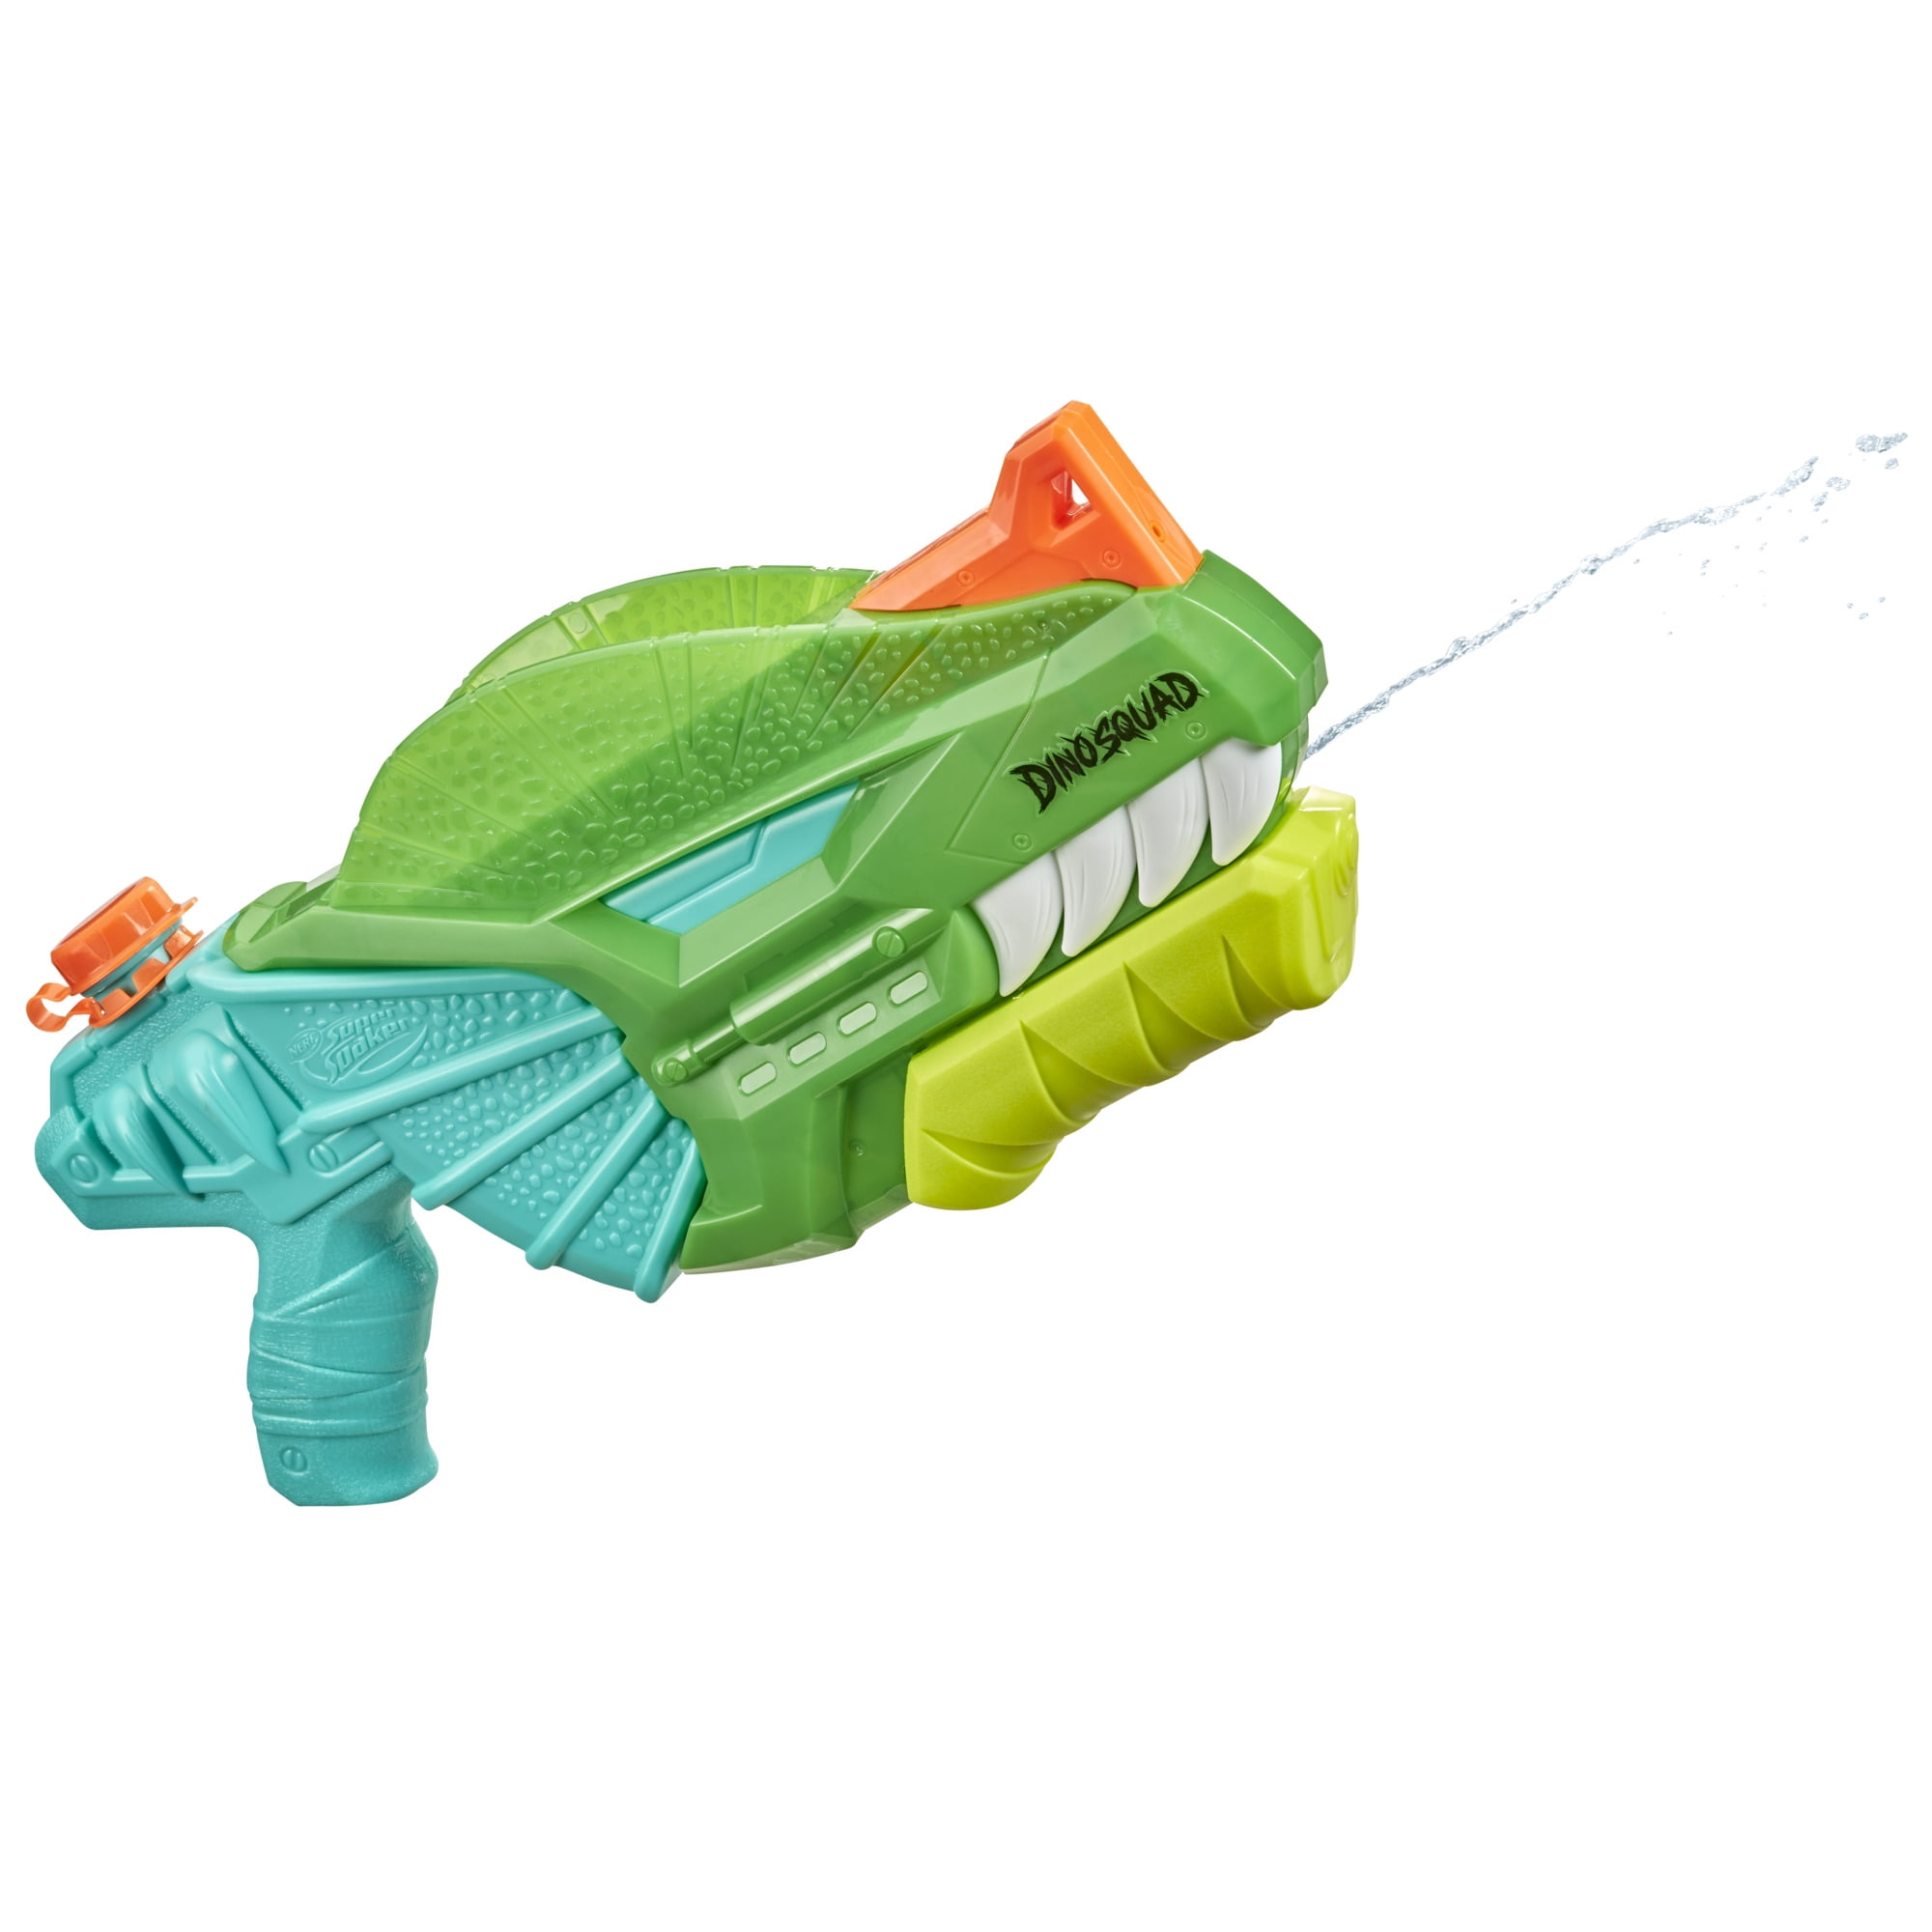 2 Hasbro NERF Super Soaker Micro Burst Water Gun Squirt Toy Stealth Pump for sale online 